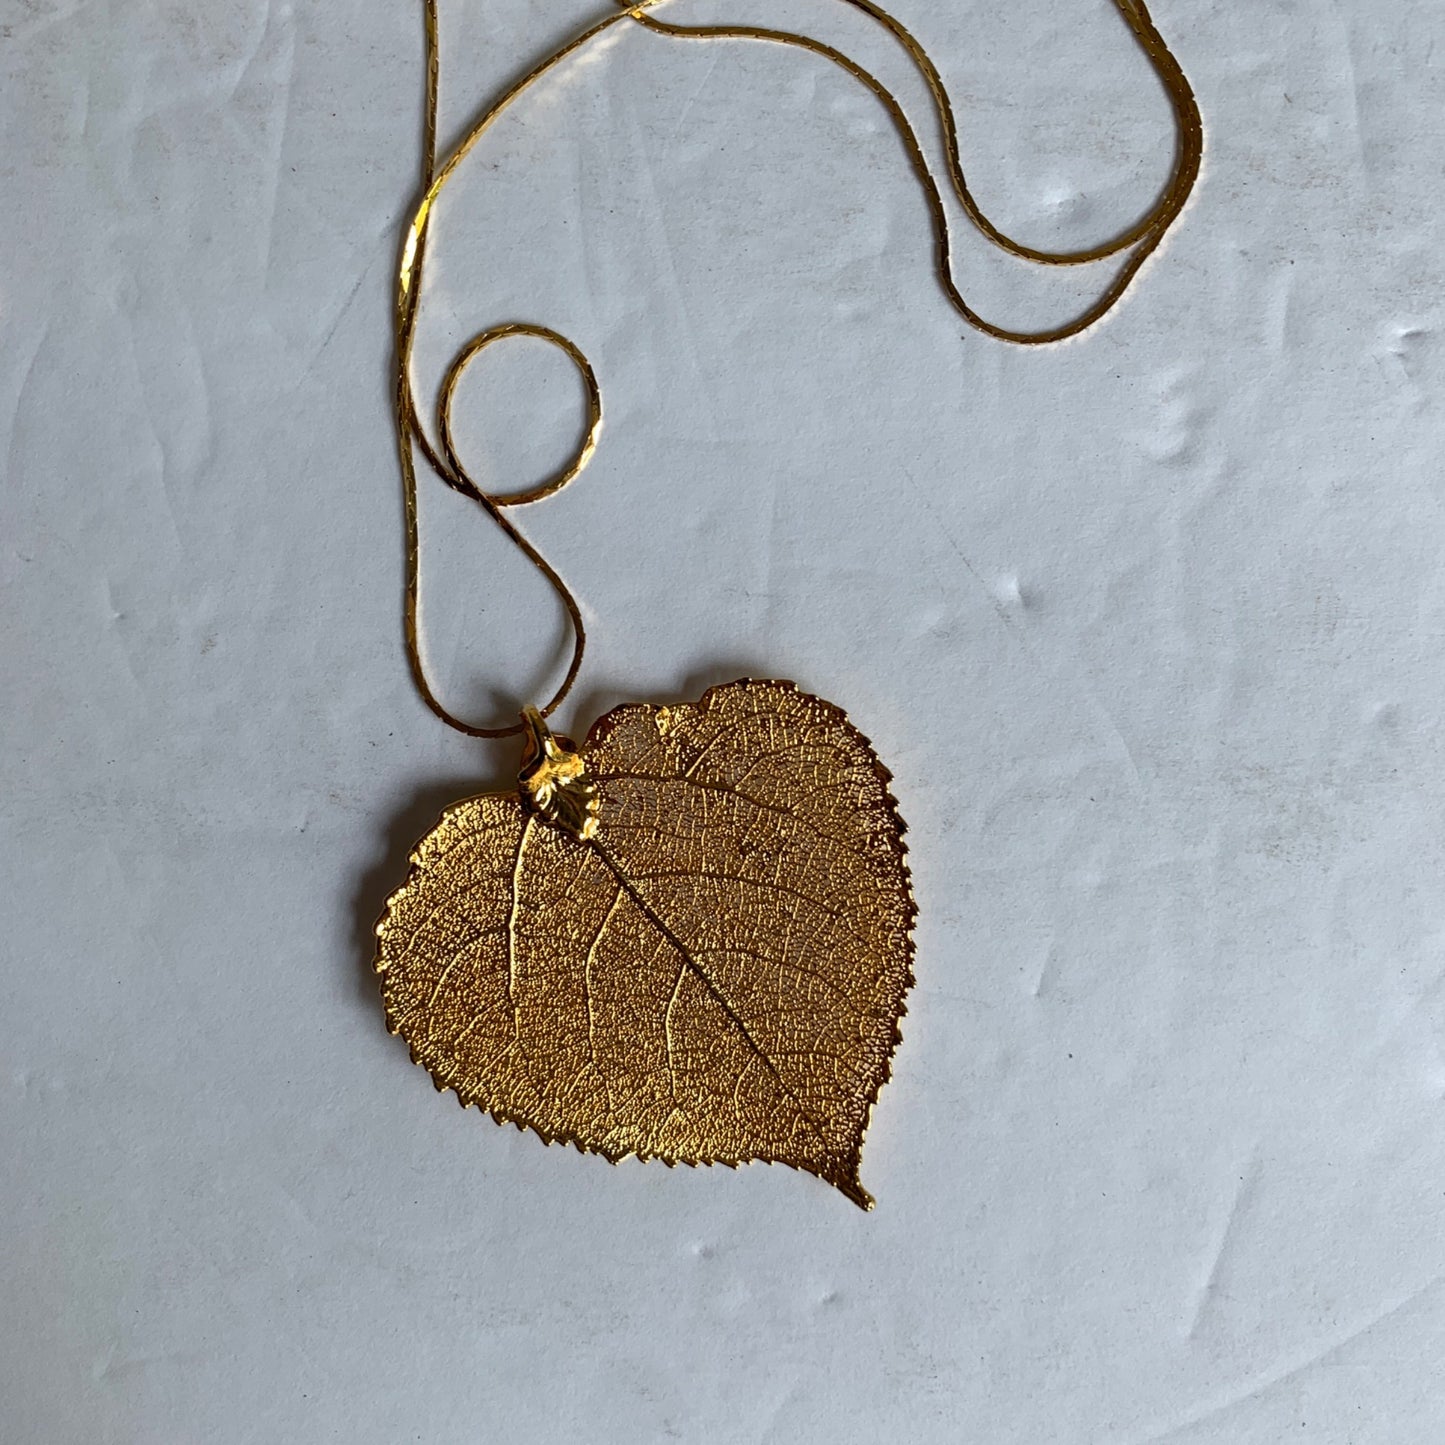 Vintage | 24KT Gold Plated Aspen Leaf Pendant and Chain Necklace